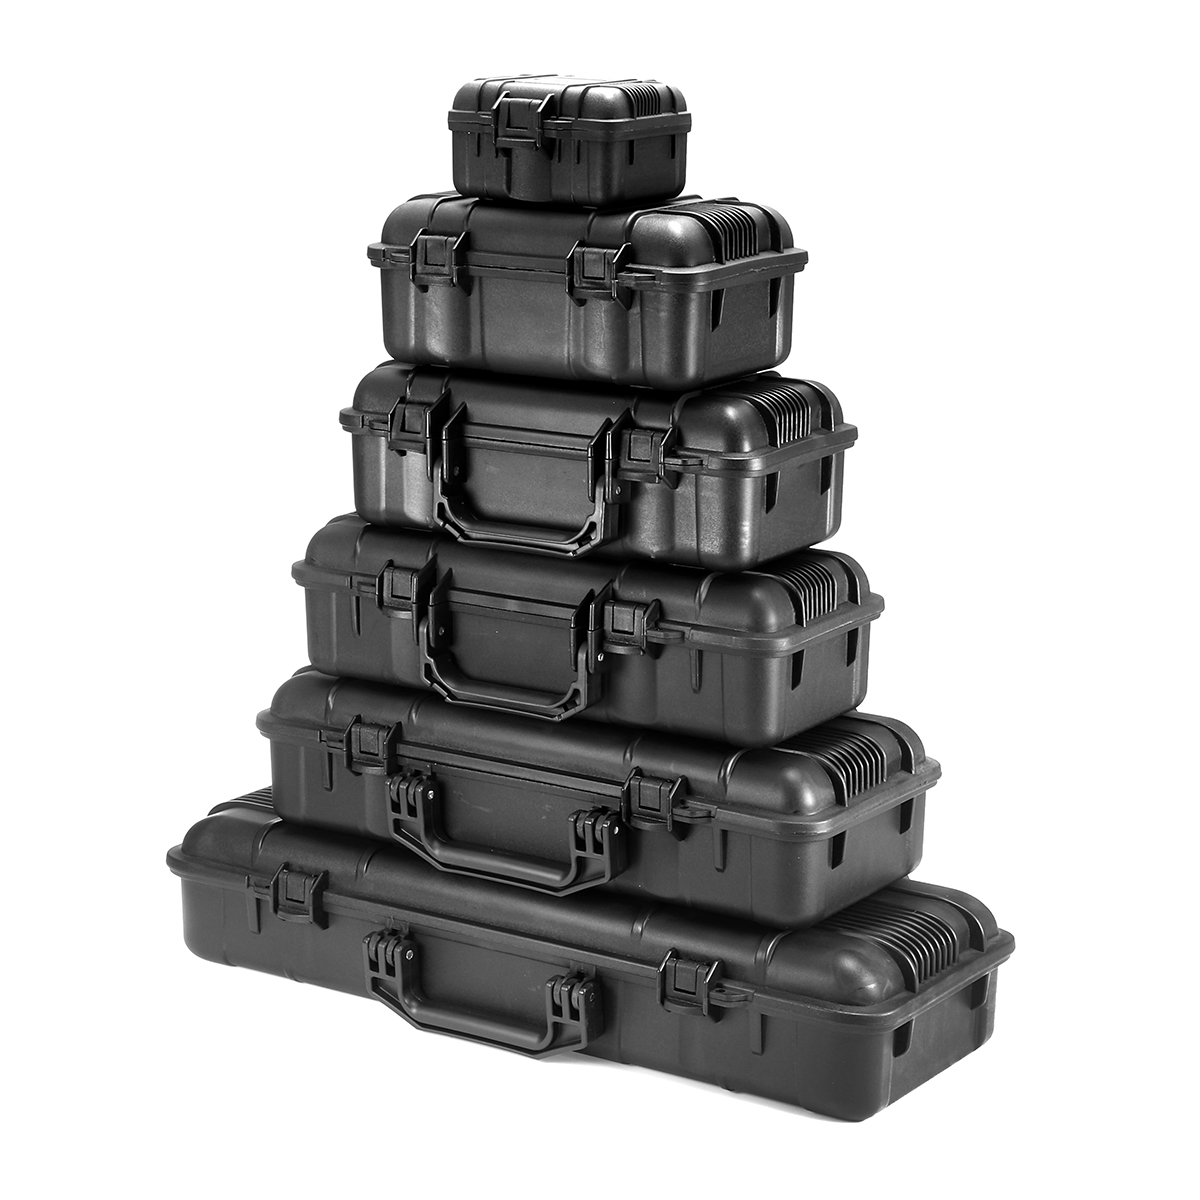 Find 1PC Protective Equipment Hard Flight Carry Case Box Camera Travel Waterproof Box for Sale on Gipsybee.com with cryptocurrencies